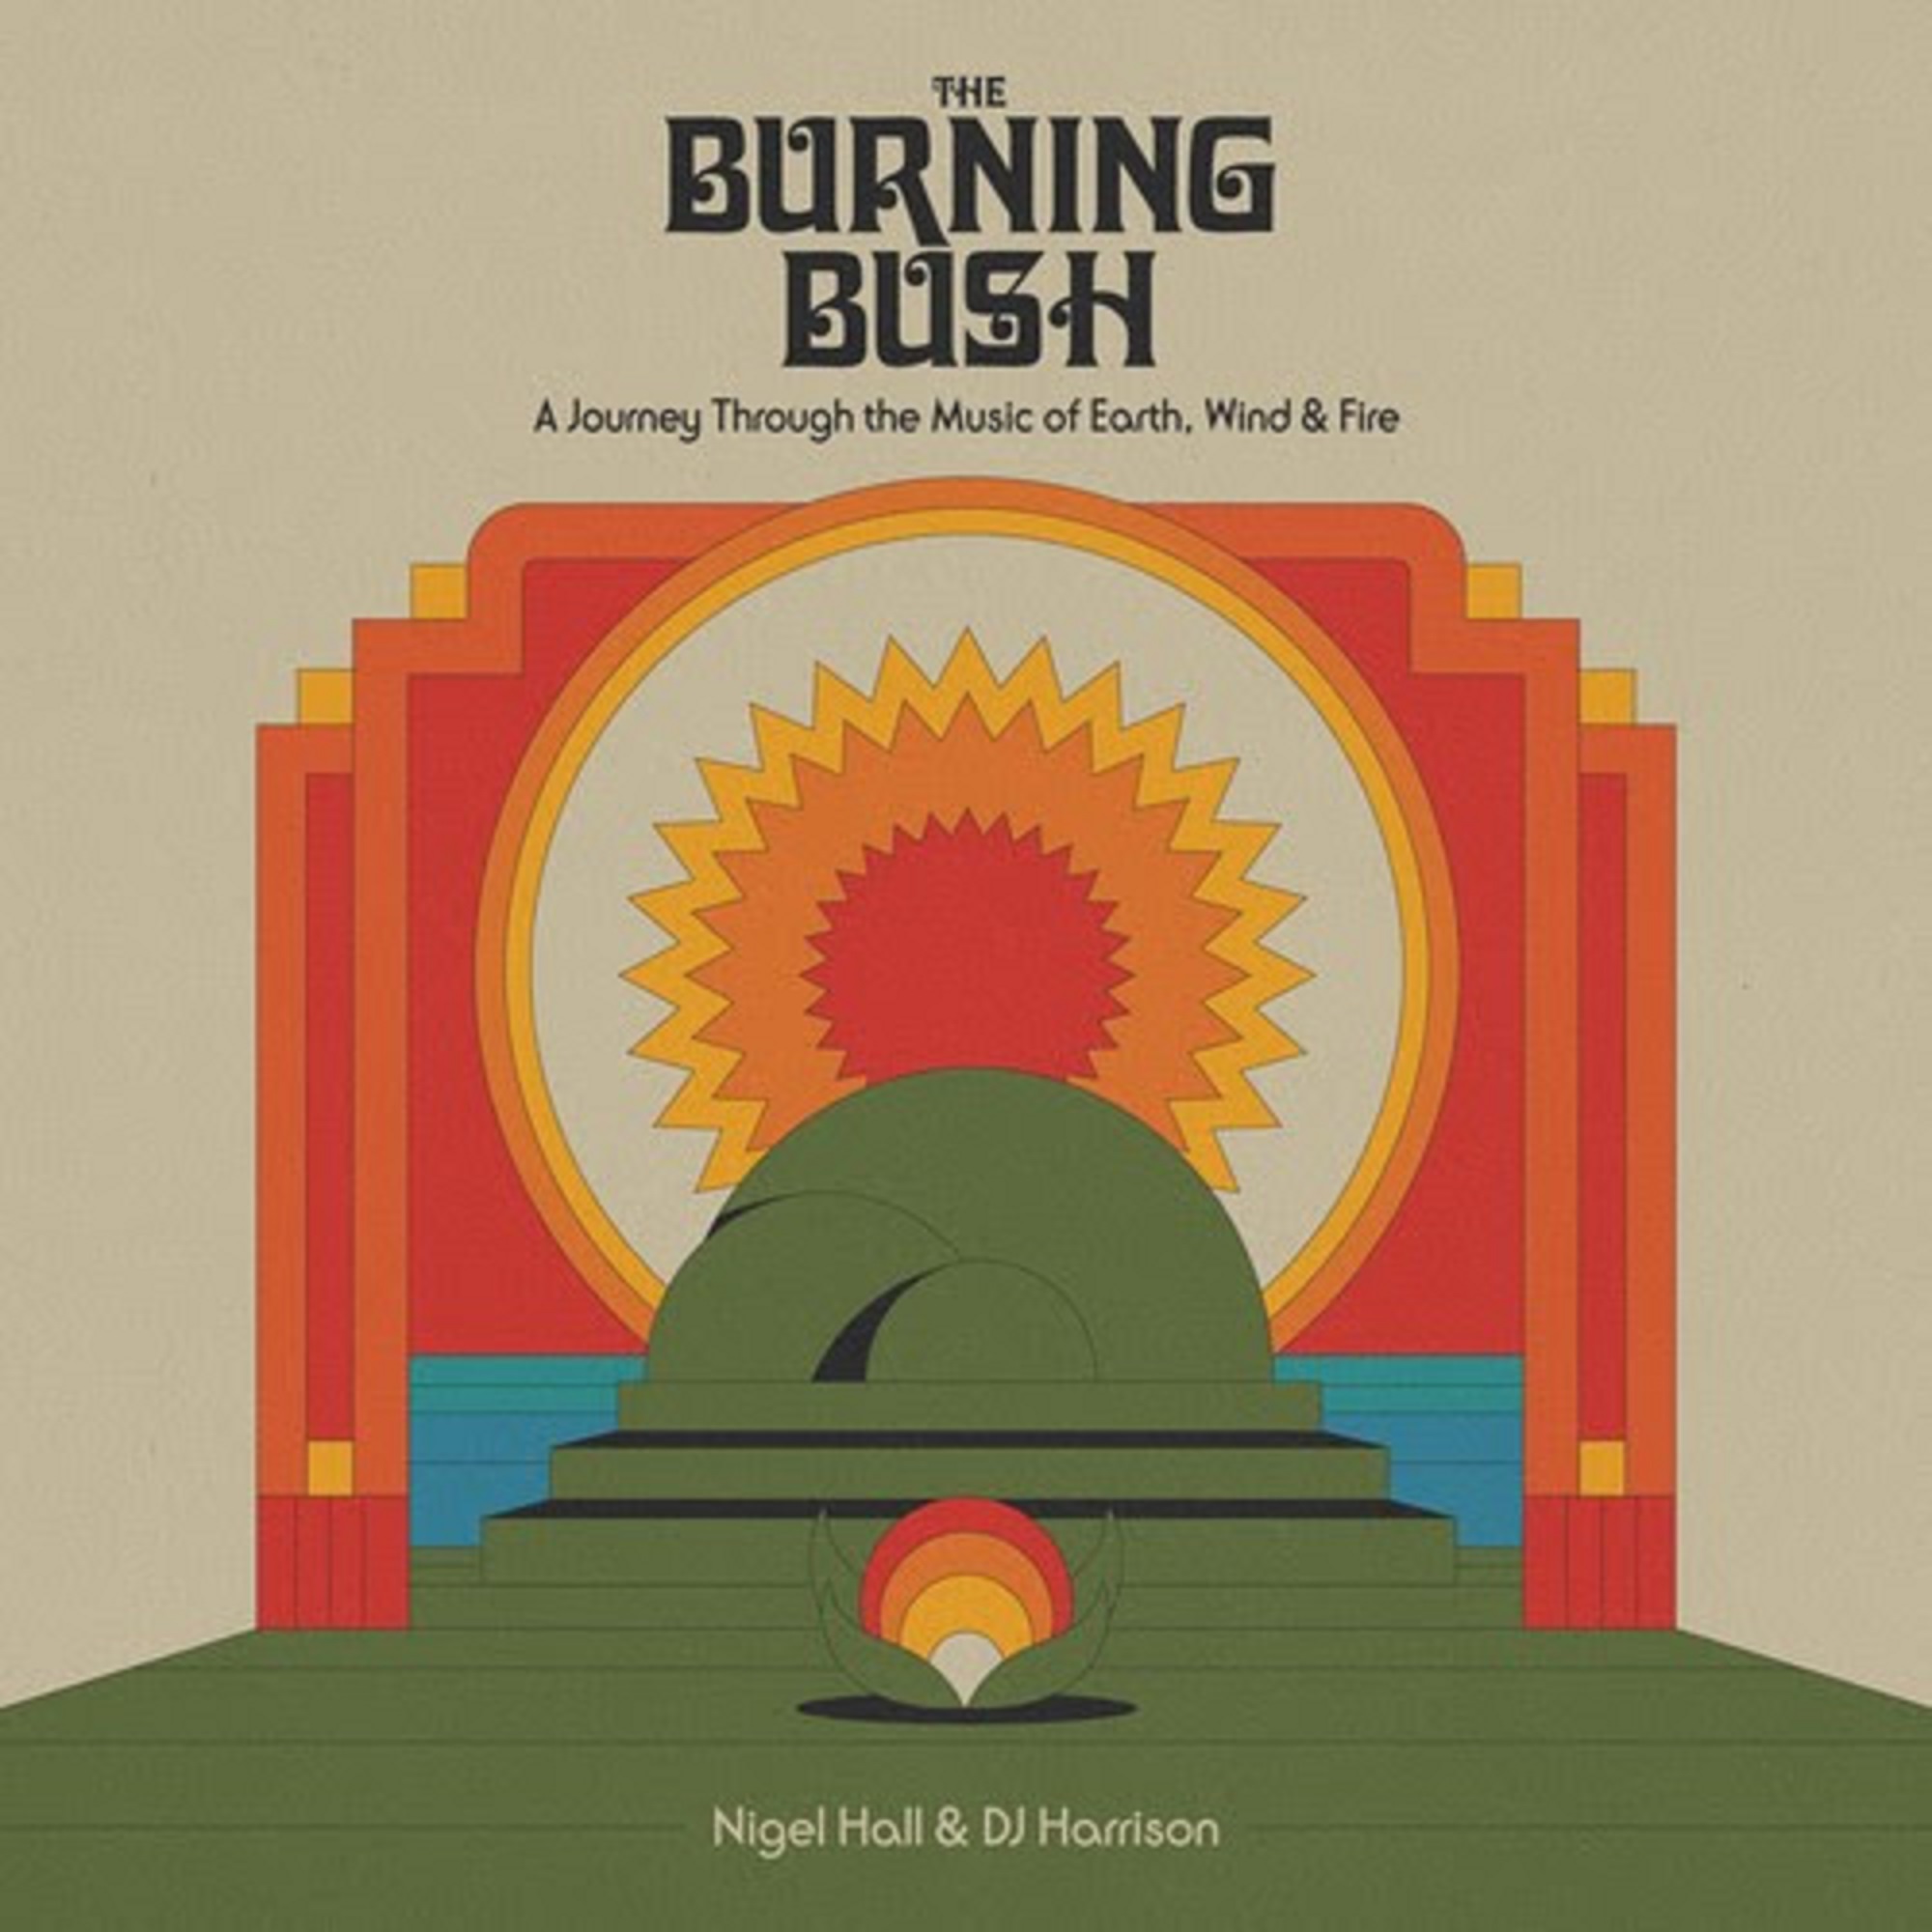 NIGEL HALL & DJ HARRISON LIGHT UP THE LEGACY OF EARTH, WIND & FIRE WITH FORTHCOMING ALBUM ‘THE BURNING BUSH: A JOURNEY THROUGH THE MUSIC OF EARTH, WIND & FIRE’